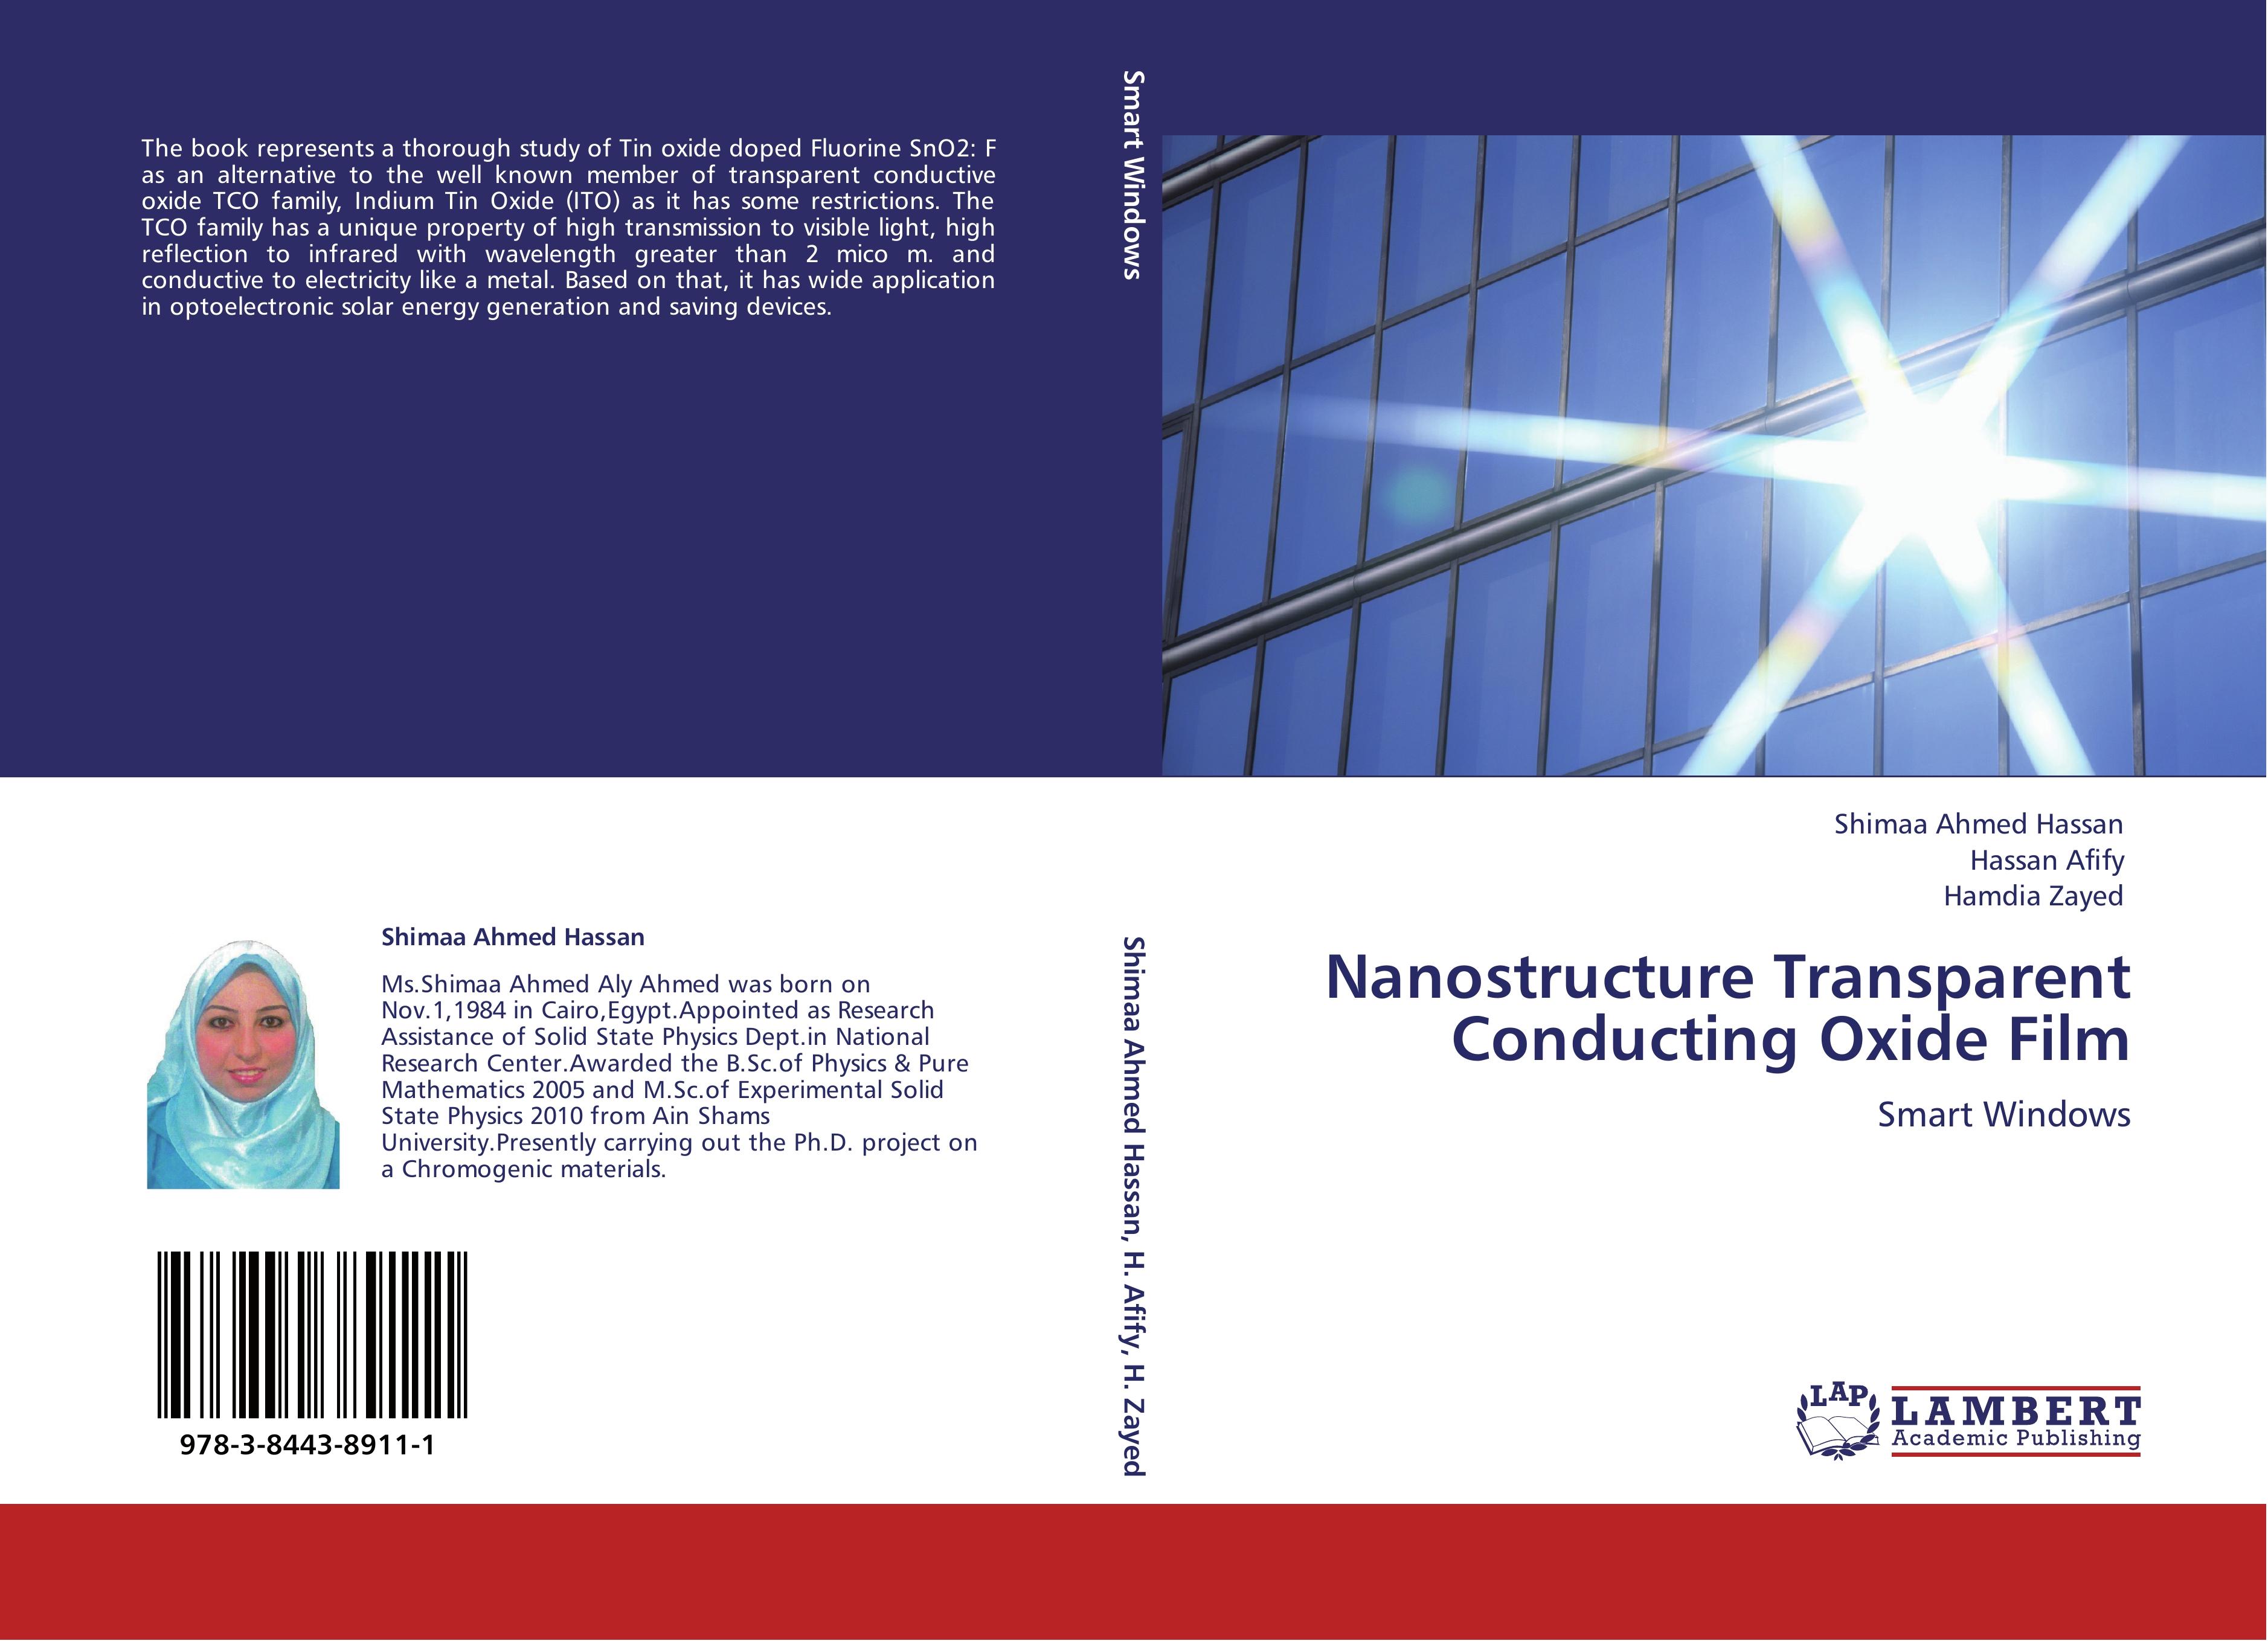 Nanostructure Transparent Conducting Oxide Film - Shimaa Ahmed Hassan Hassan Afify Hamdia Zayed